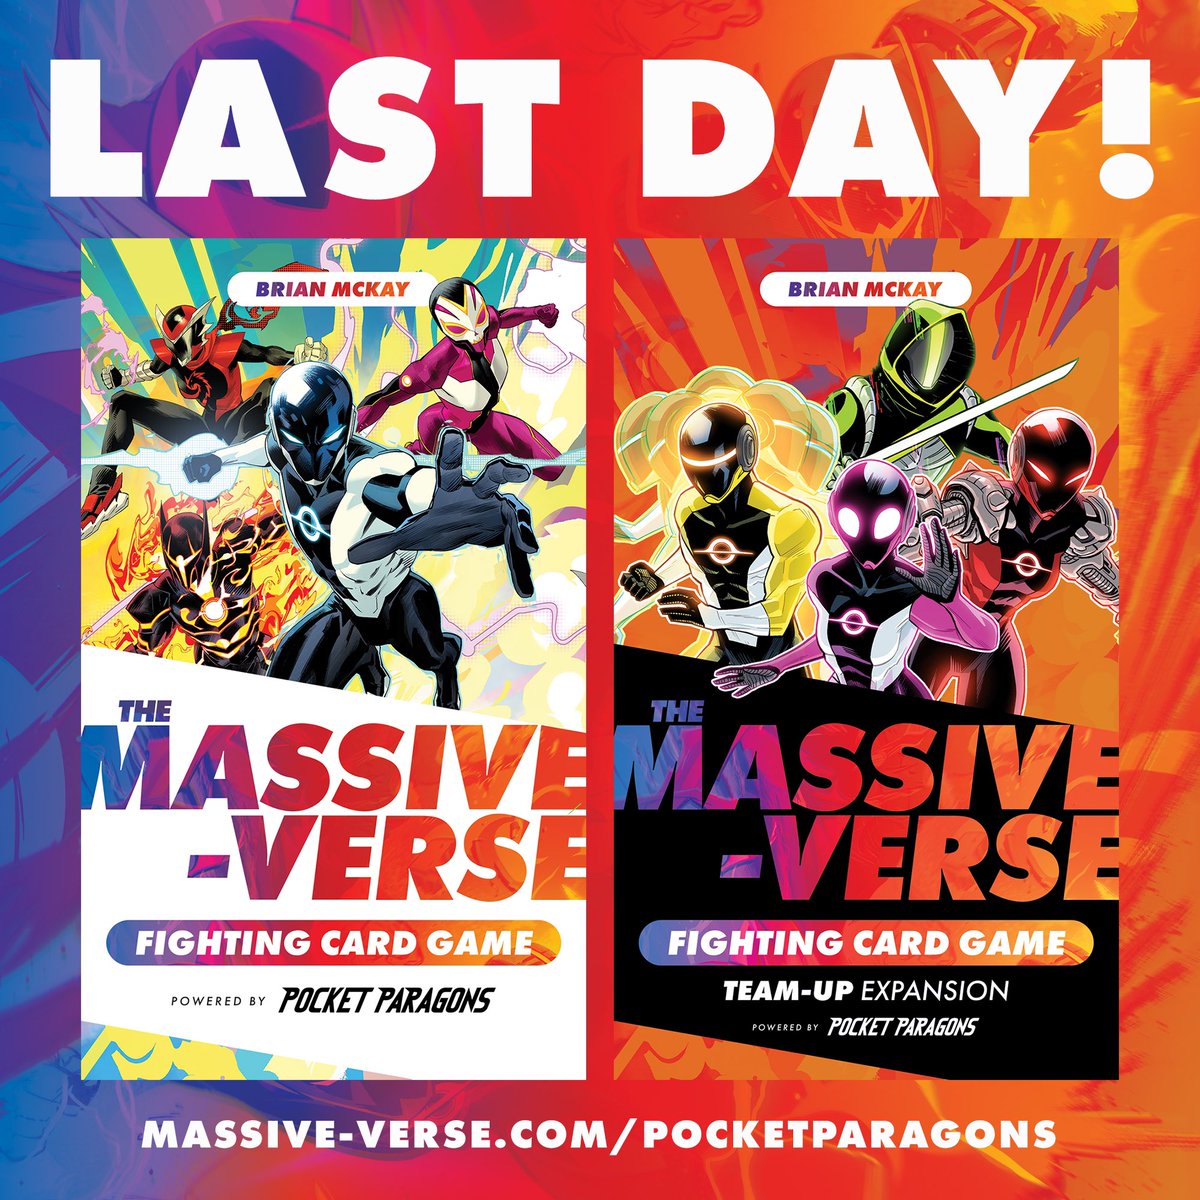 🚨 LESS THAN 24 HOURS TO GO! 🚨 We worked with @solis_studio to turn our creator-owned comics characters into a fighting card game! With the help of backers we’ve added two extra characters to the game! It’s your last chance to back go go go go! massive-verse.com/pocketparagons